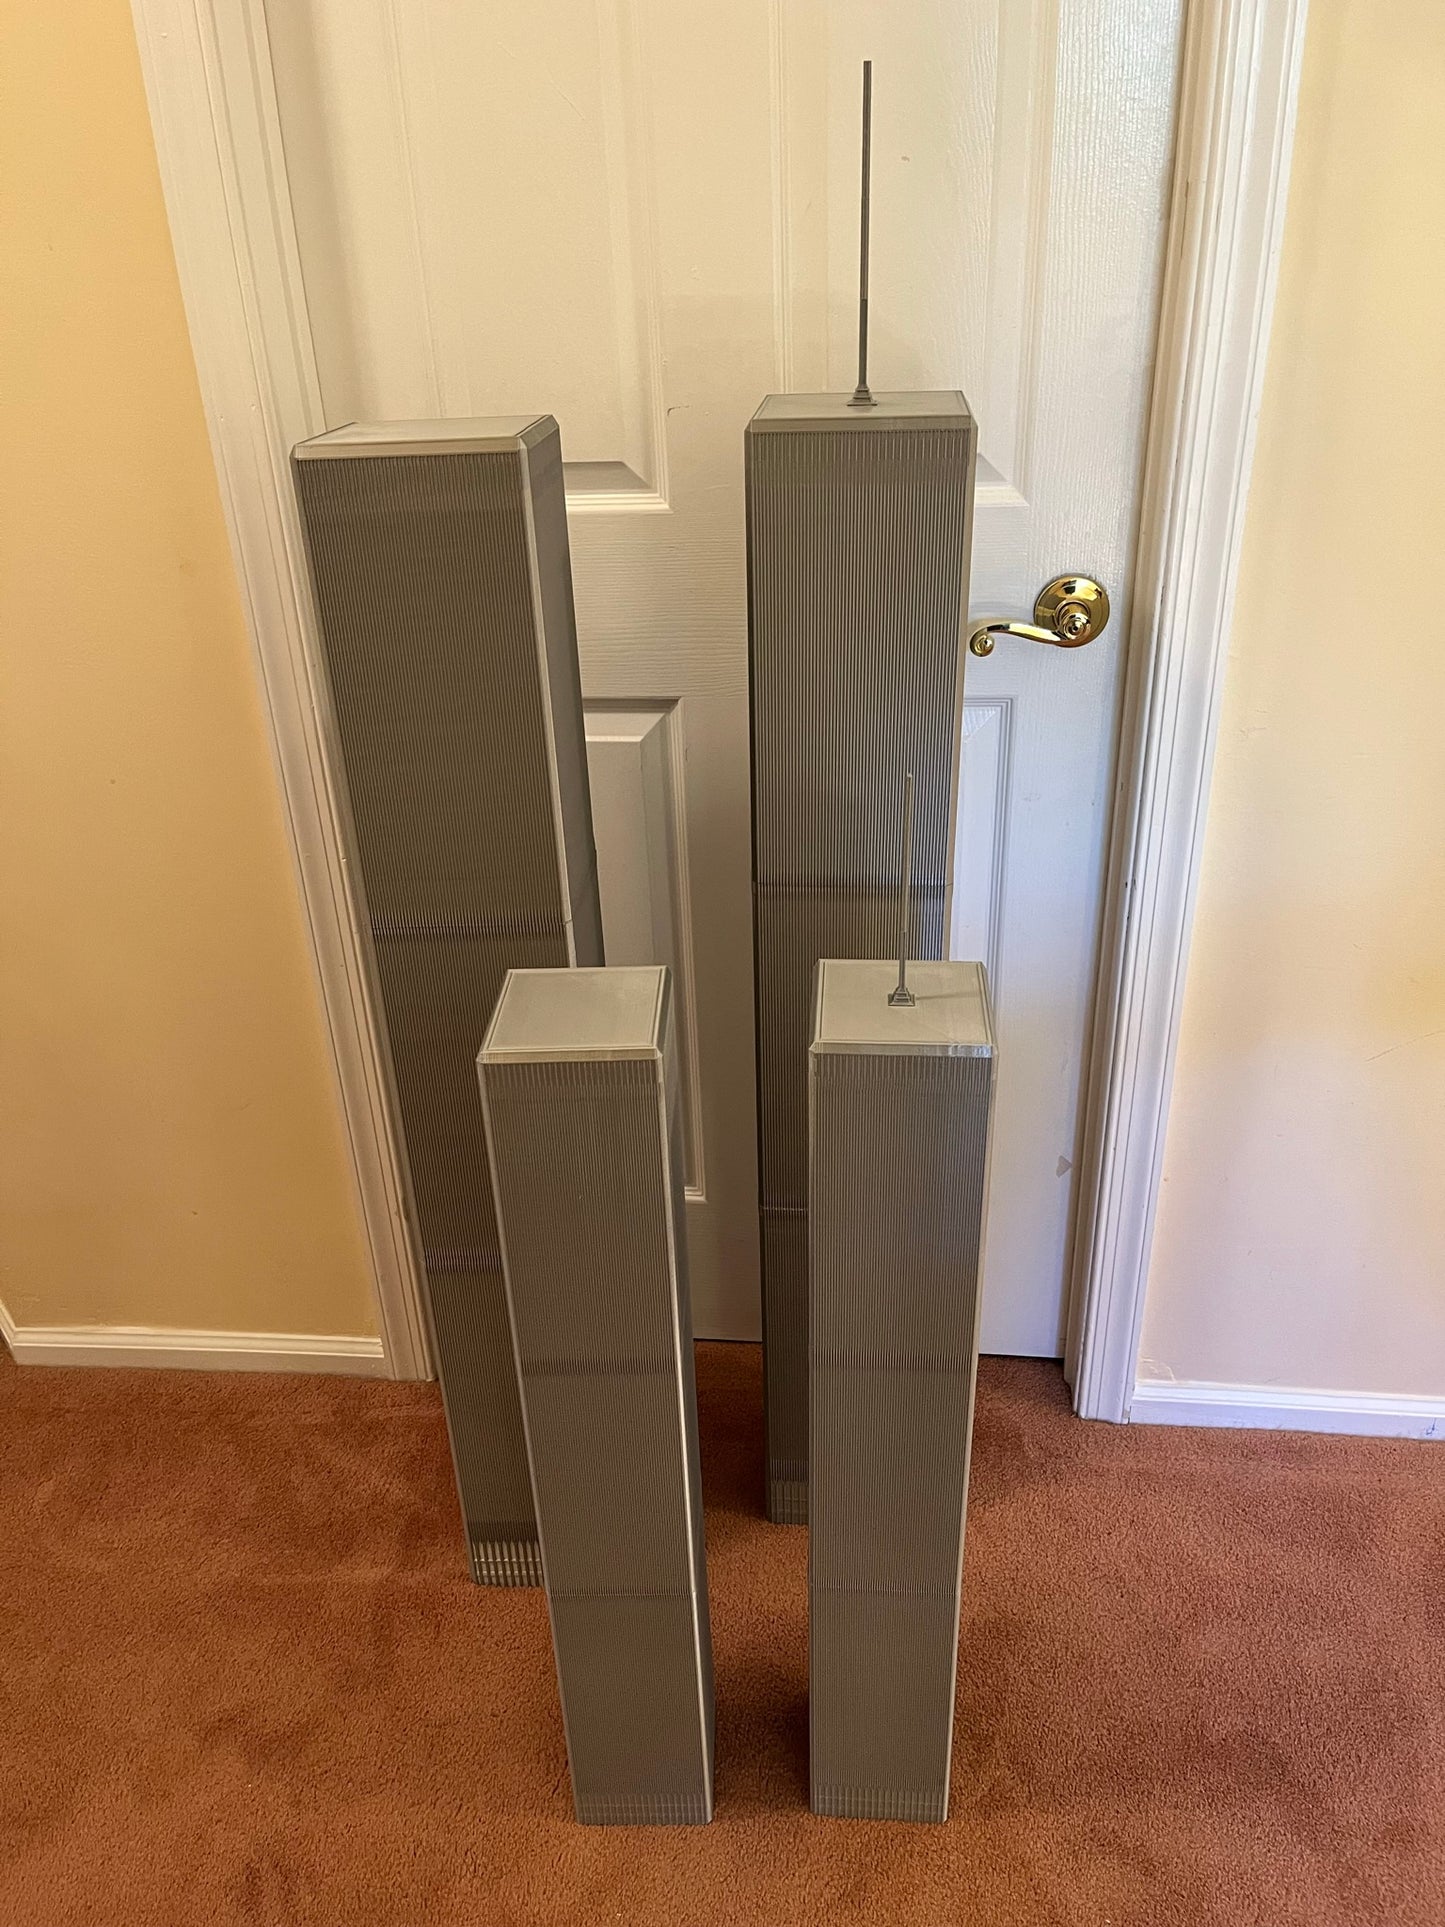 Extra Large Twin Towers Model- 3D Printed